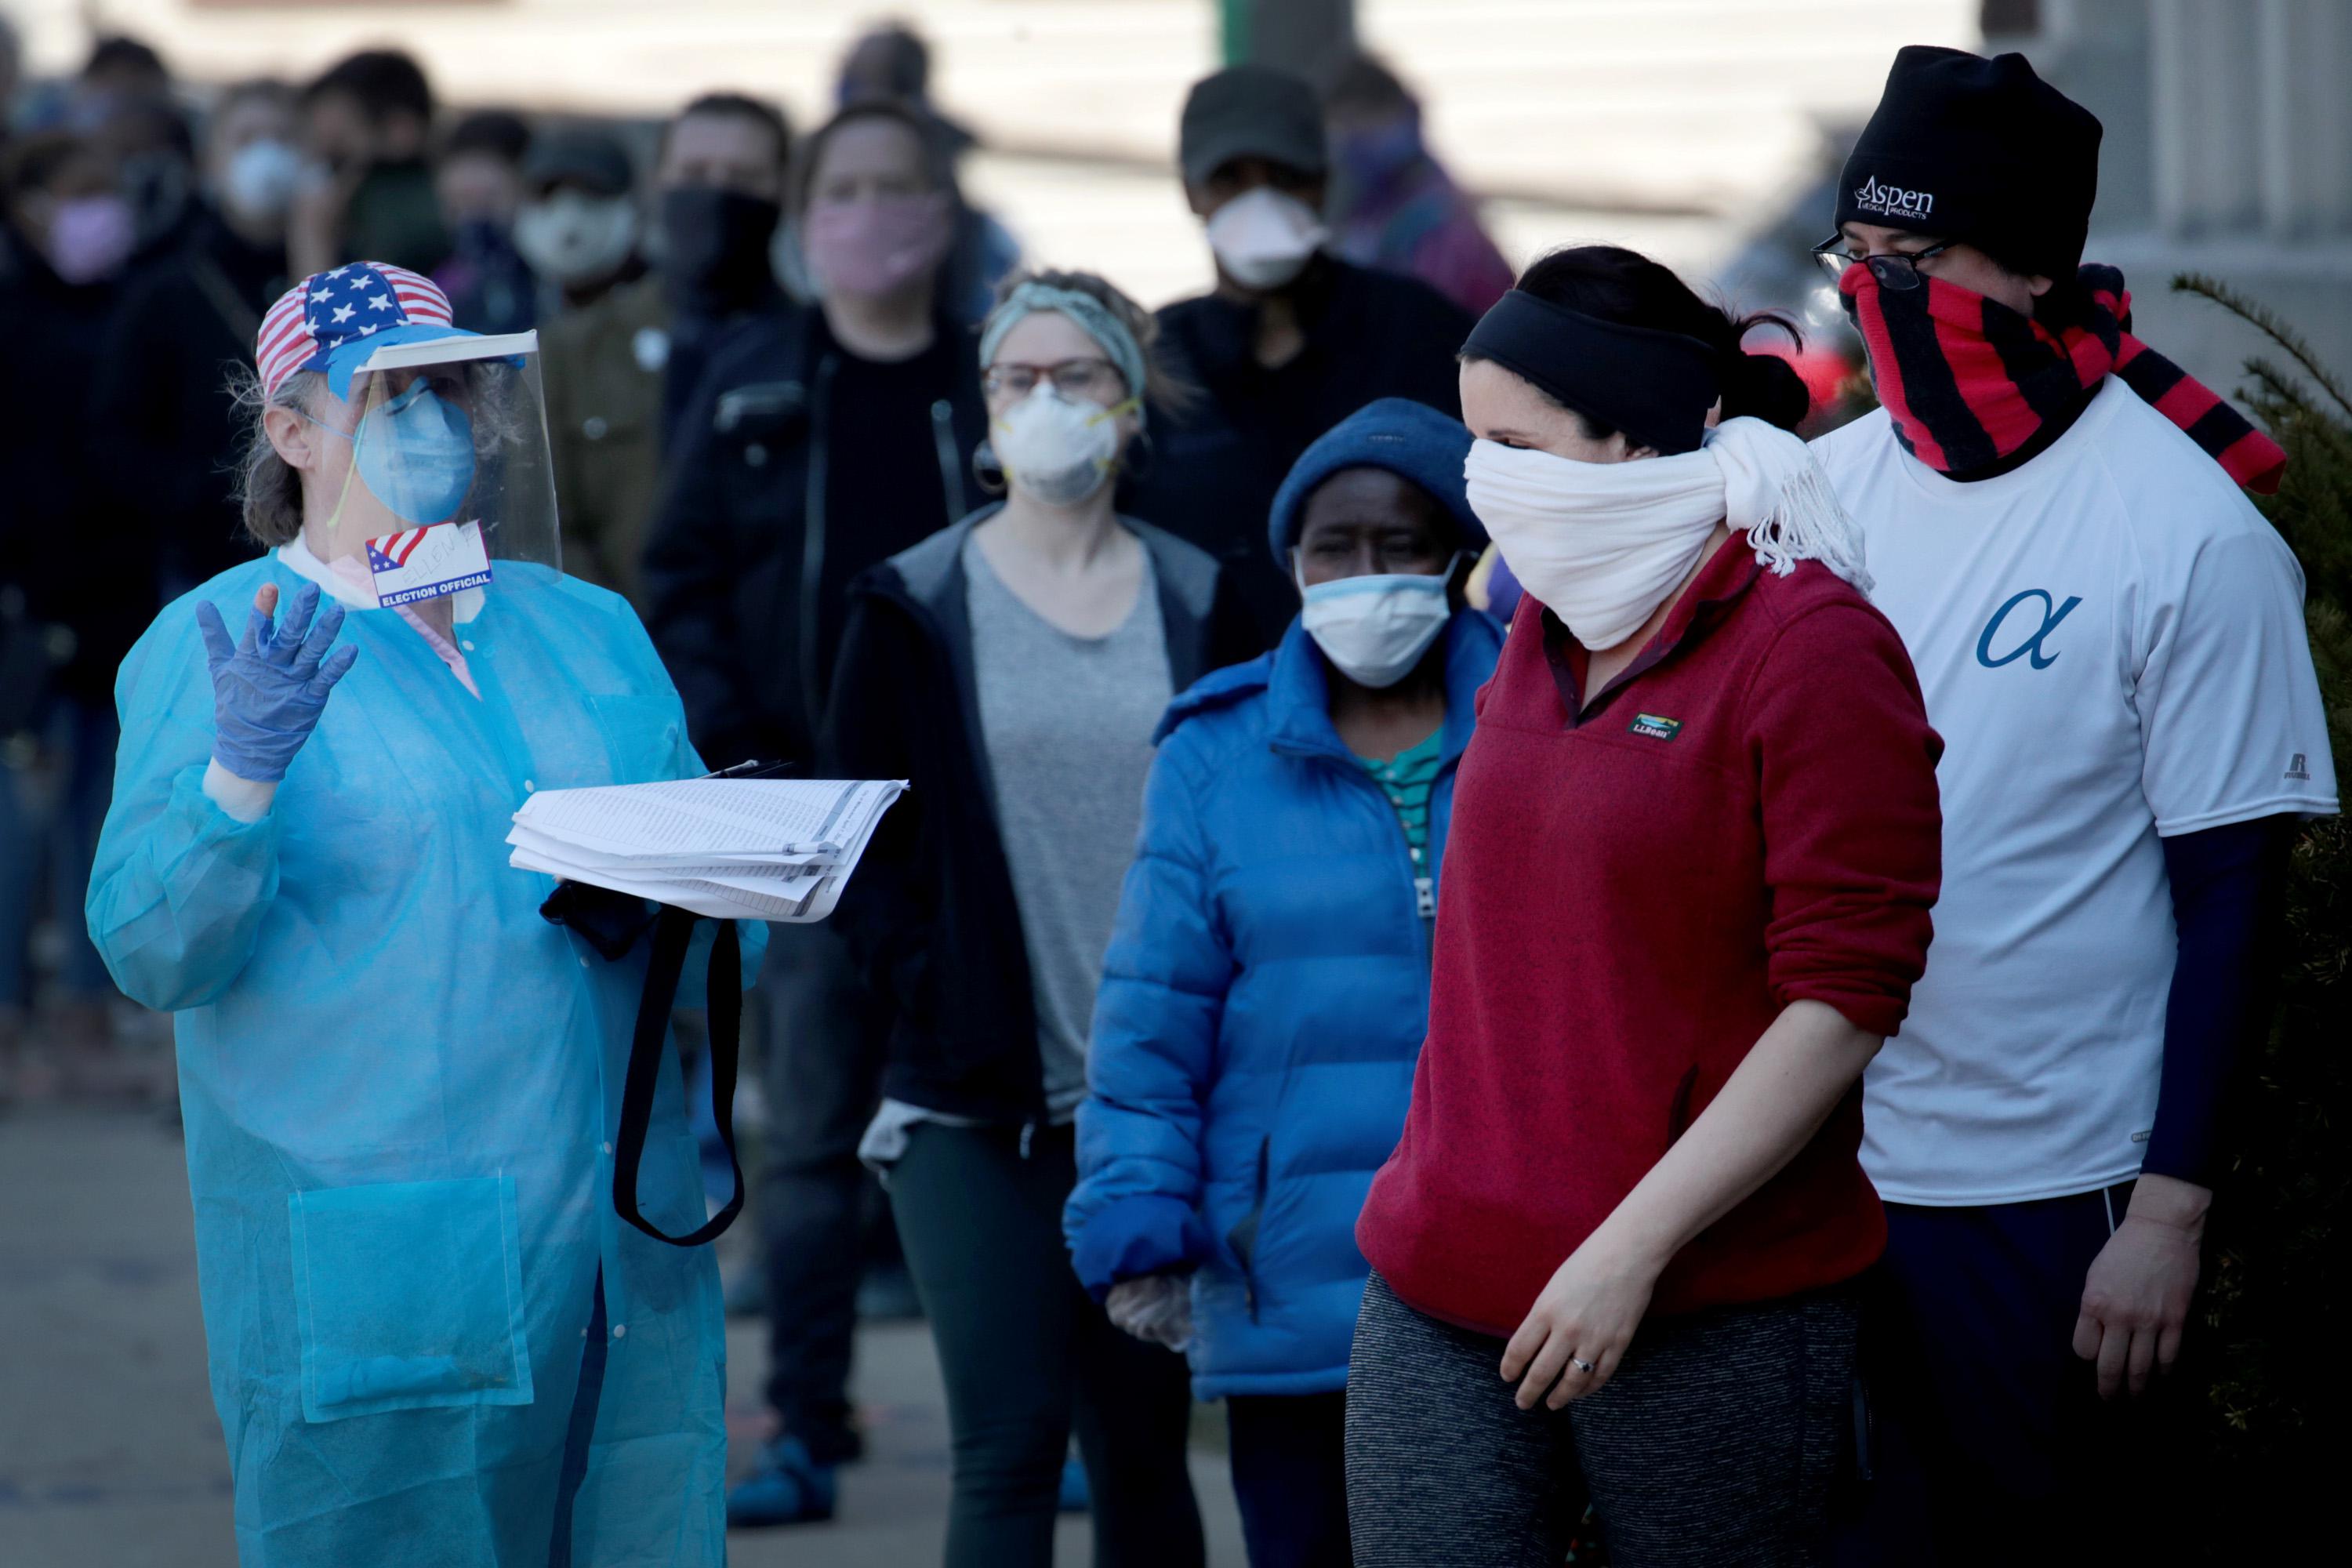 A polling official wearing a gown, gloves, and a face mask directs people in line wearing cloth face coverings